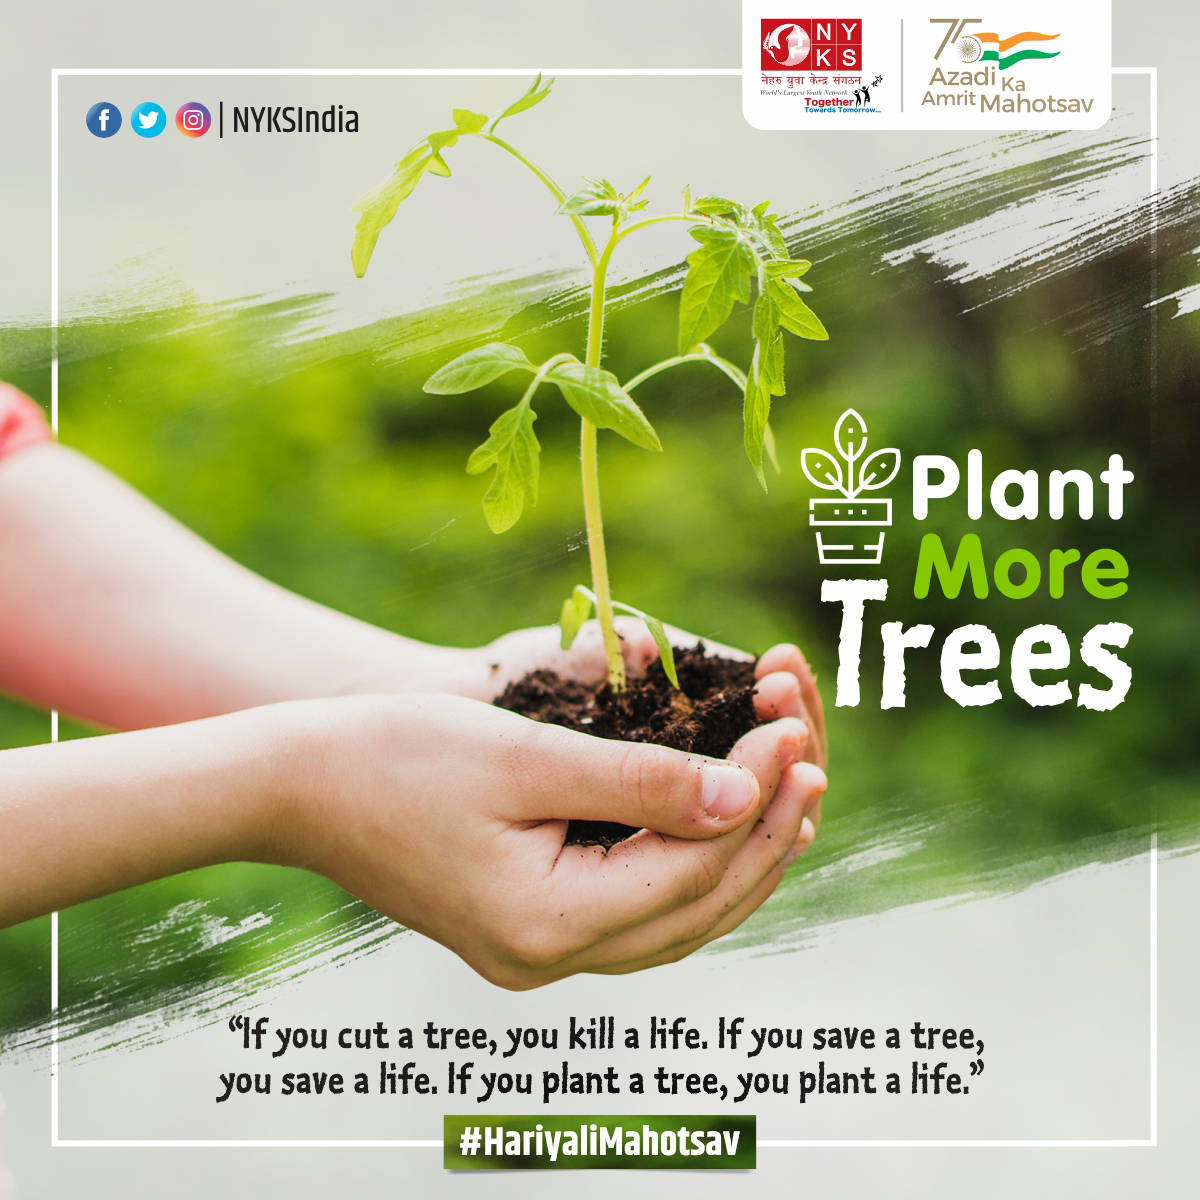 Trees make the environment cleaner and provide us with oxygen. They’re essential for life to flourish. #HariyaliMahotsav #plant #Environment #tree #lifestyle